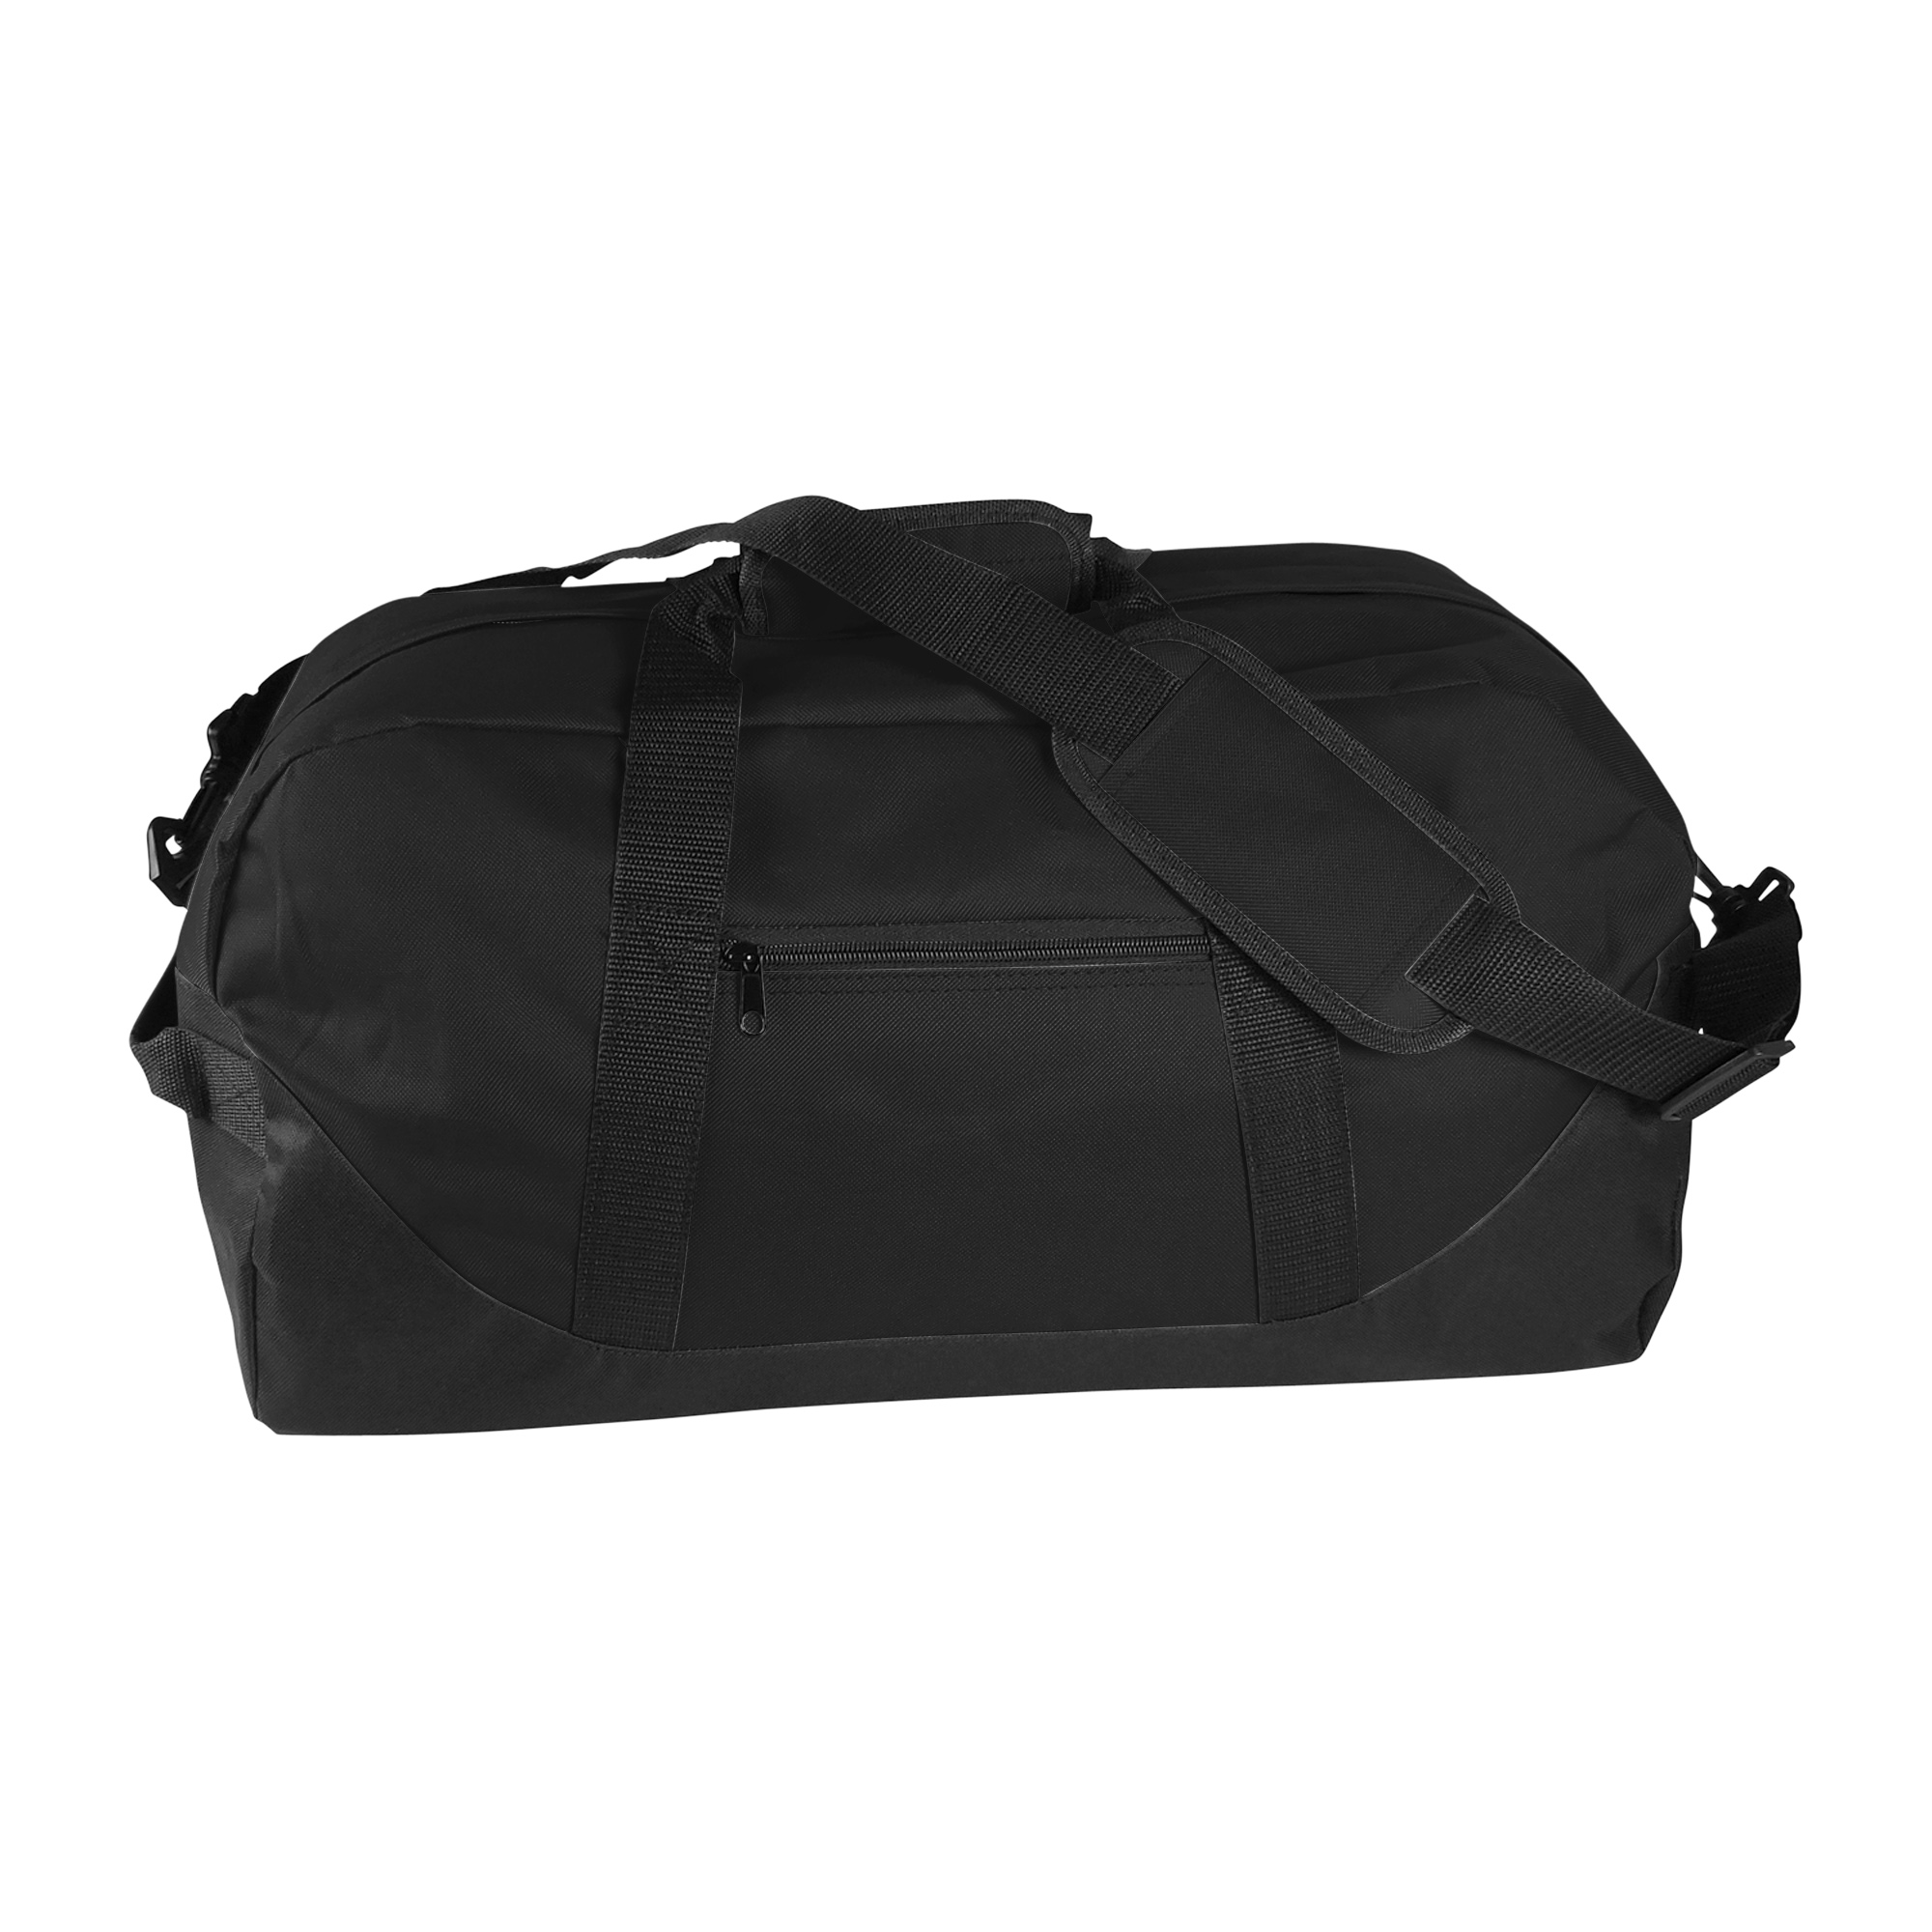 21 Large Duffle Bag with Adjustable Strap in Black - image 4 of 4